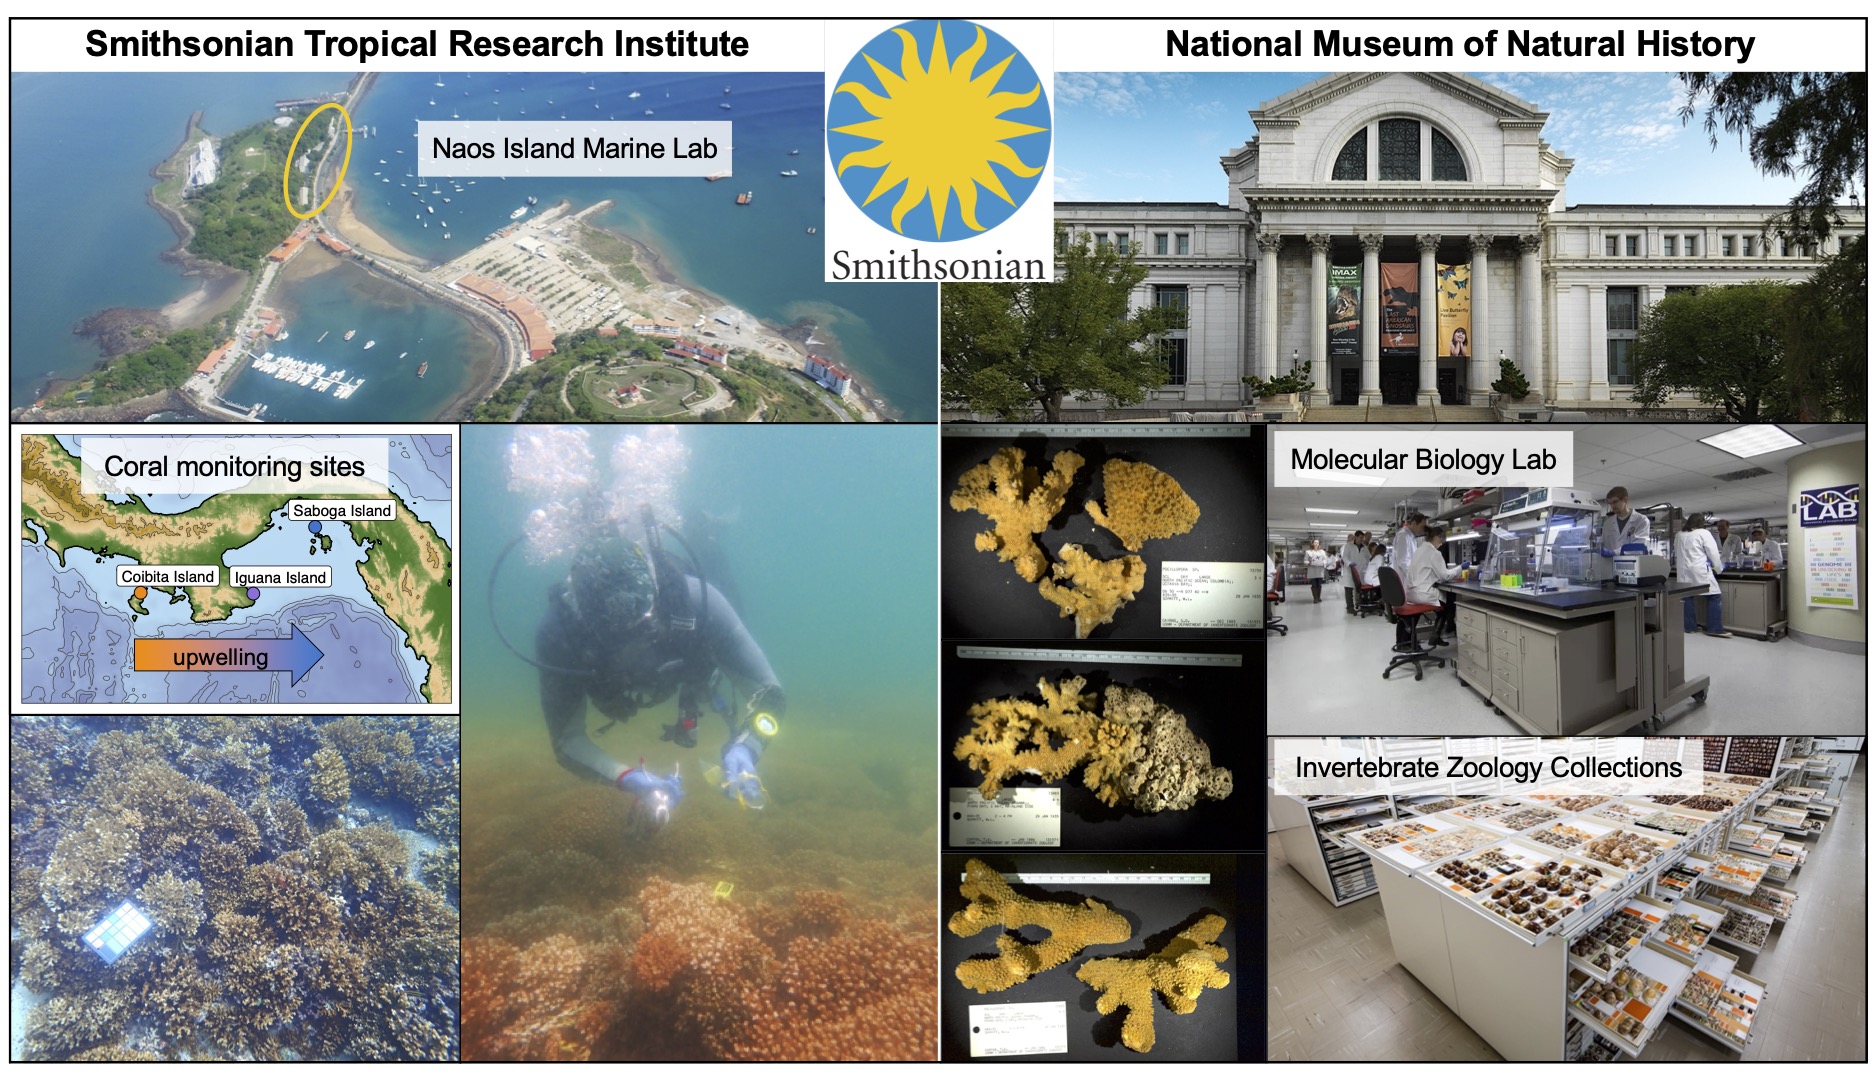 Smithsonian research facilities at STRI and NMNH. The STRI Naos Island Marine Lab grants access to coral monitoring sites in the eastern Pacific, and the NMNH IZ department has an immense specimen collection and cutting-edge molecular laboratories.